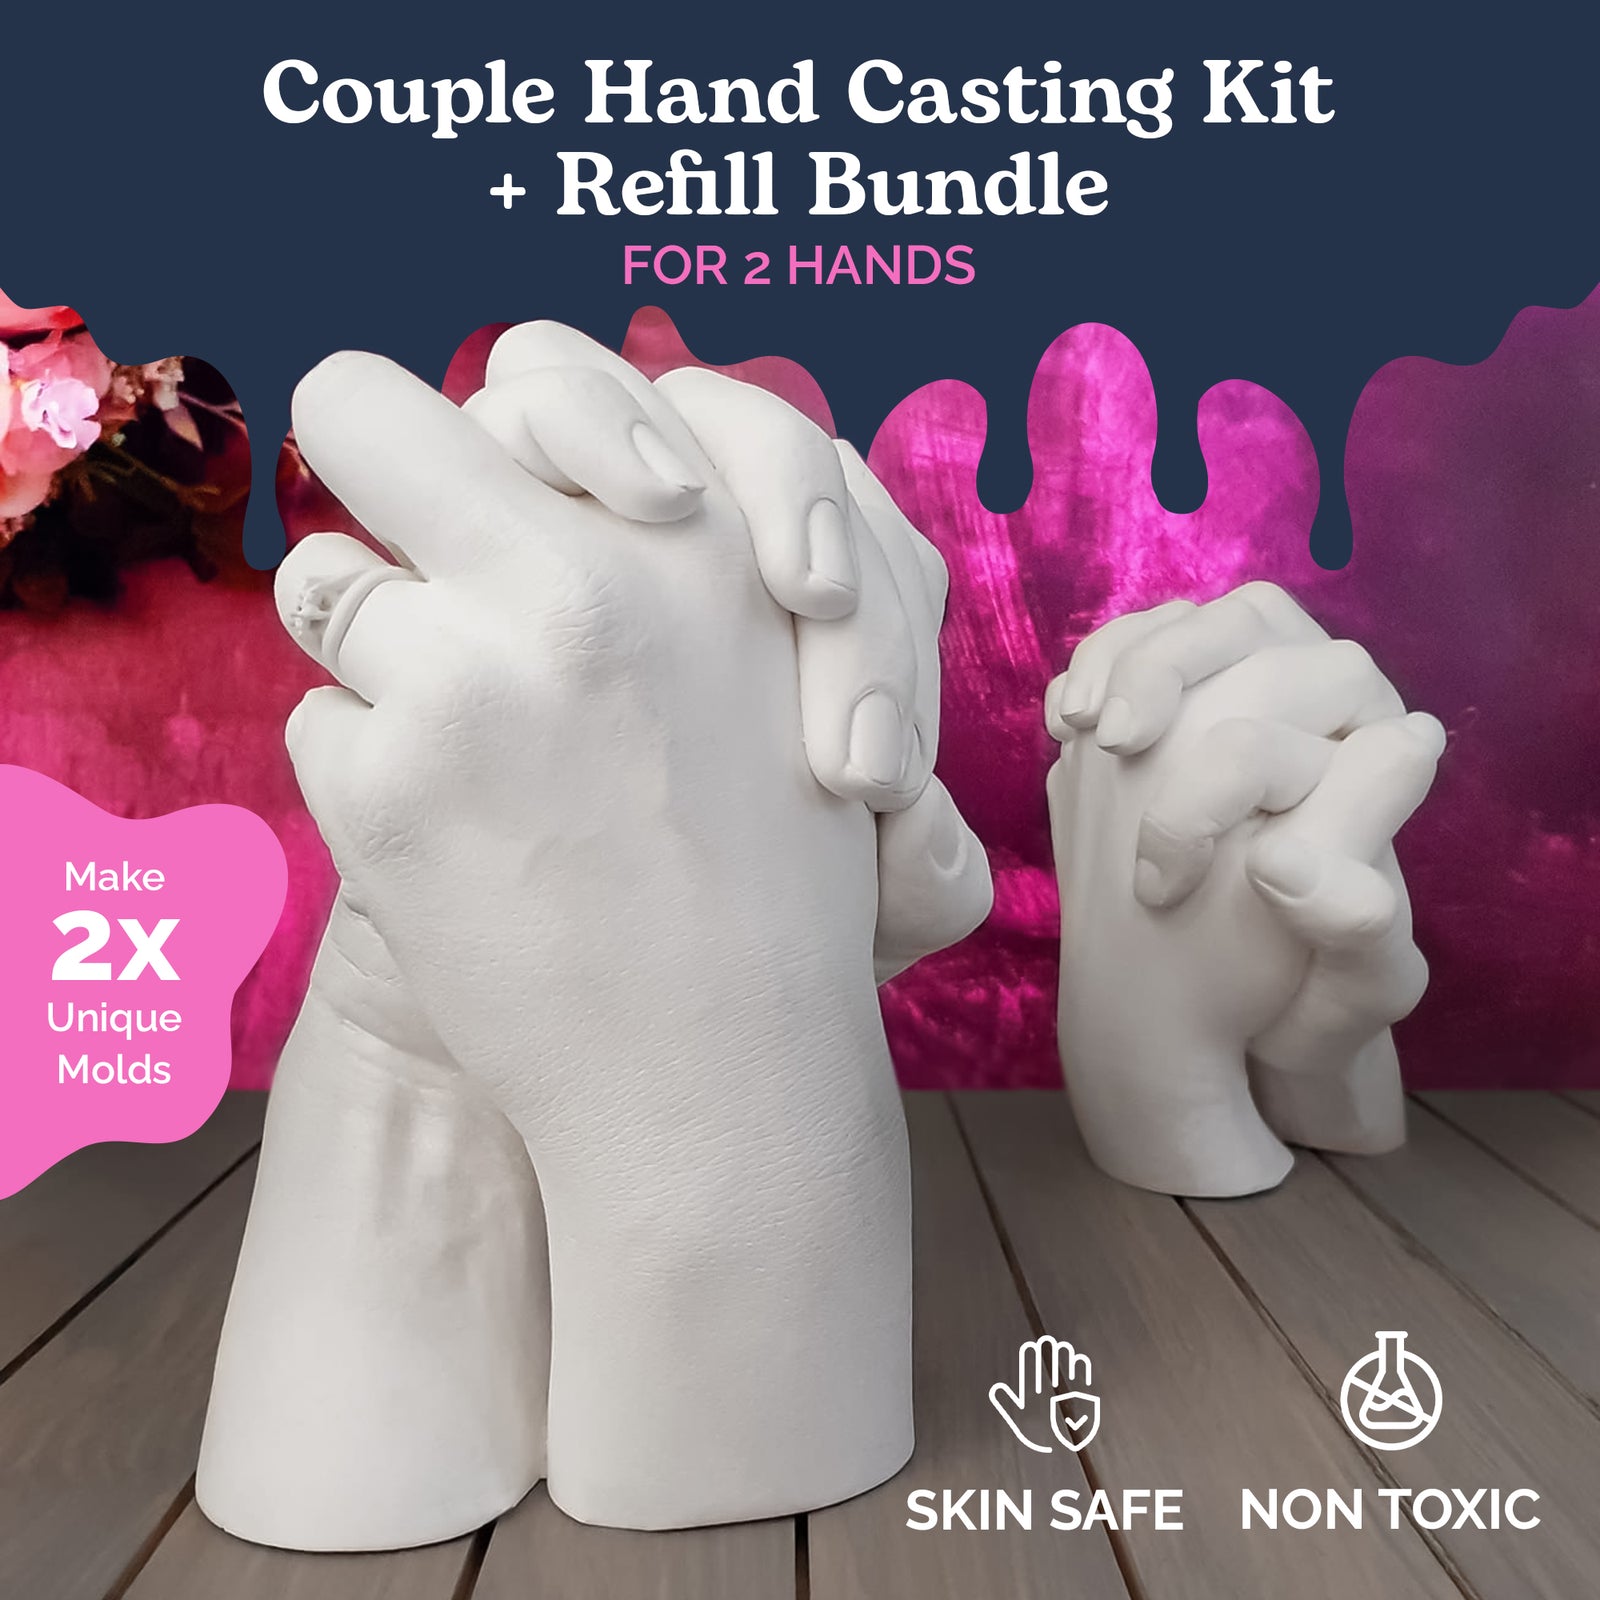 Hand Casting Kit Couples - Plaster Hand Mold Casting Kit, DIY Kits for  Adults and Kids, Wedding Gifts for Couple, Hand Mold Kit Couples Gifts for  Her, Birthday Gifts for Mom 